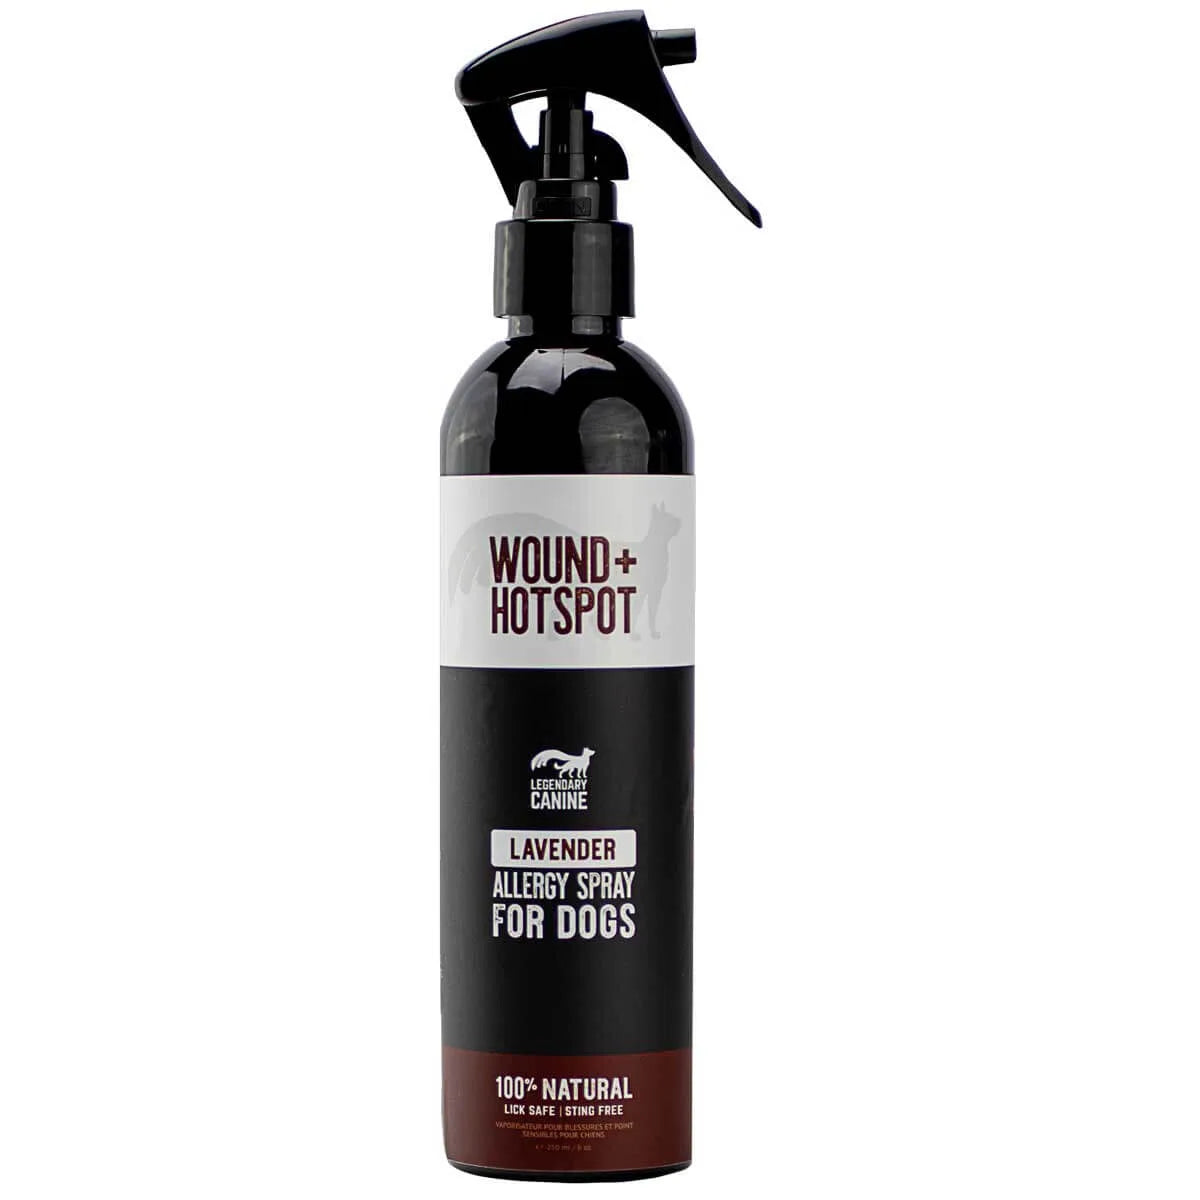 Legendary Canine - 100% Natural Wound & Hotspot Spray (For Dogs)